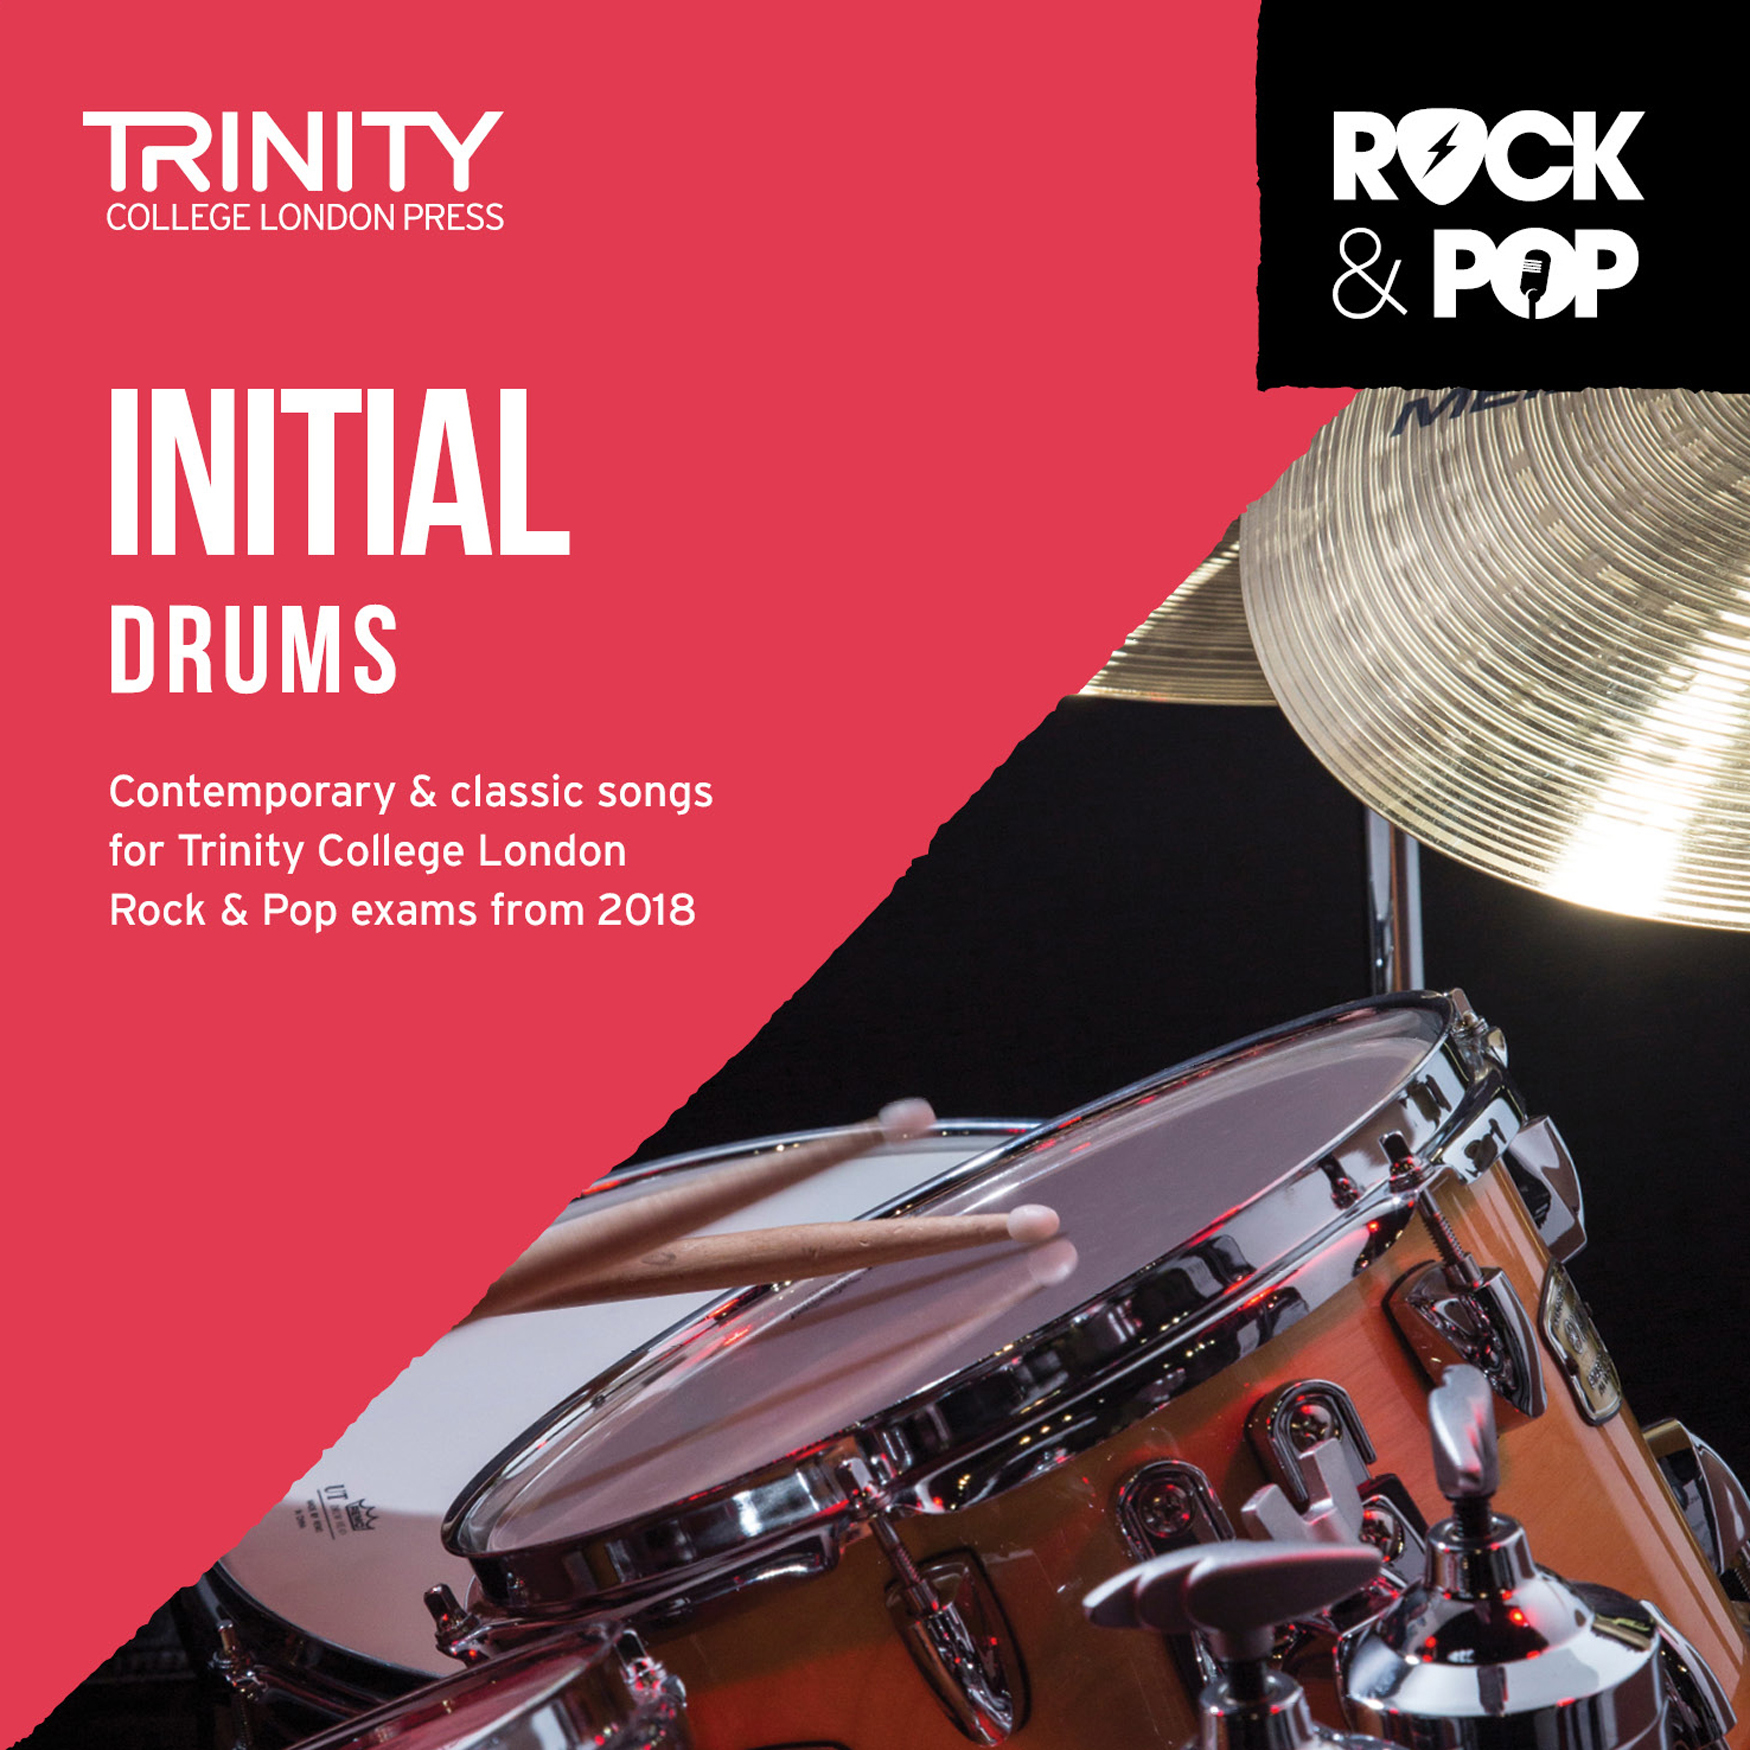 Trinity Rock and Pop 2018-20 Drums Initial CD: Drum Kit: CD